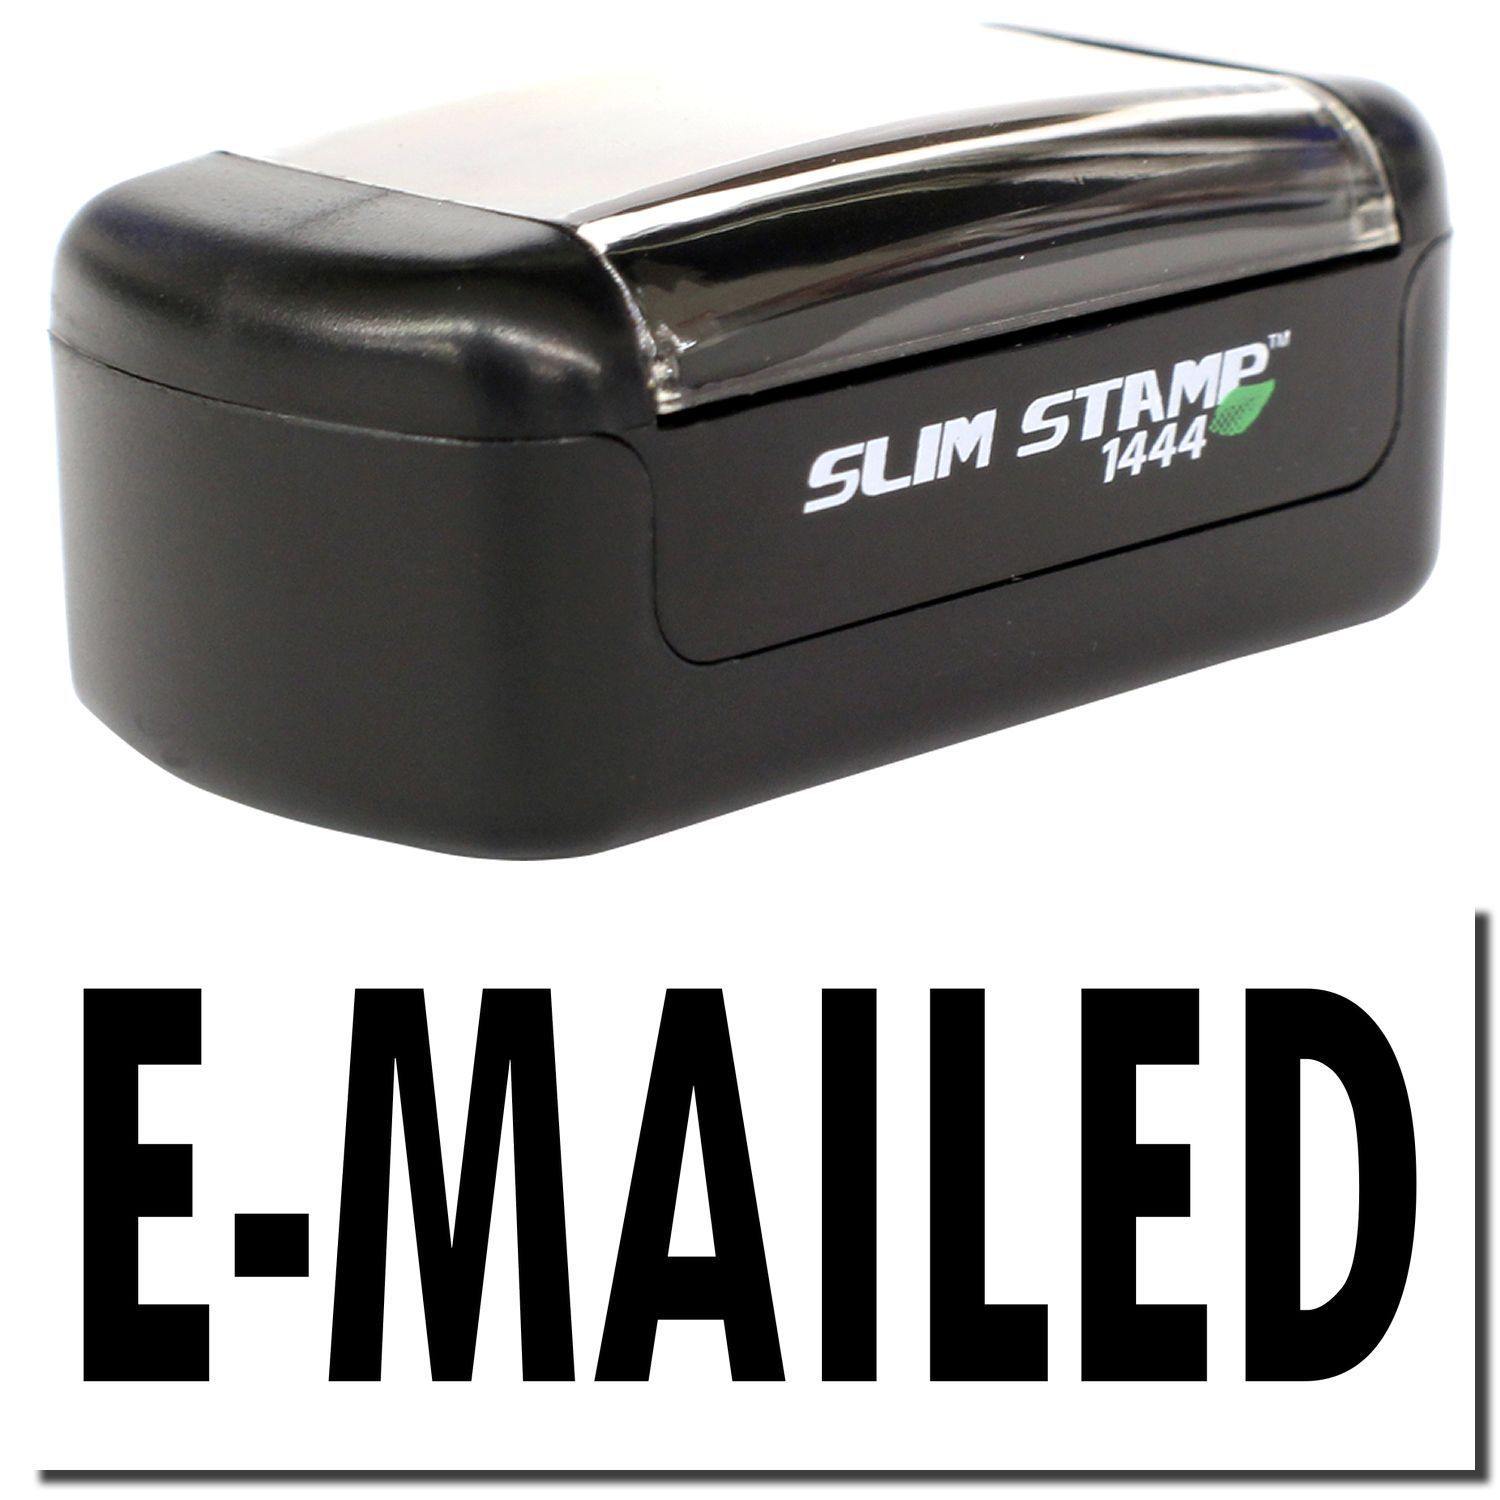 A stock office pre-inked stamp with a stamped image showing how the text "E-MAILED" is displayed after stamping.